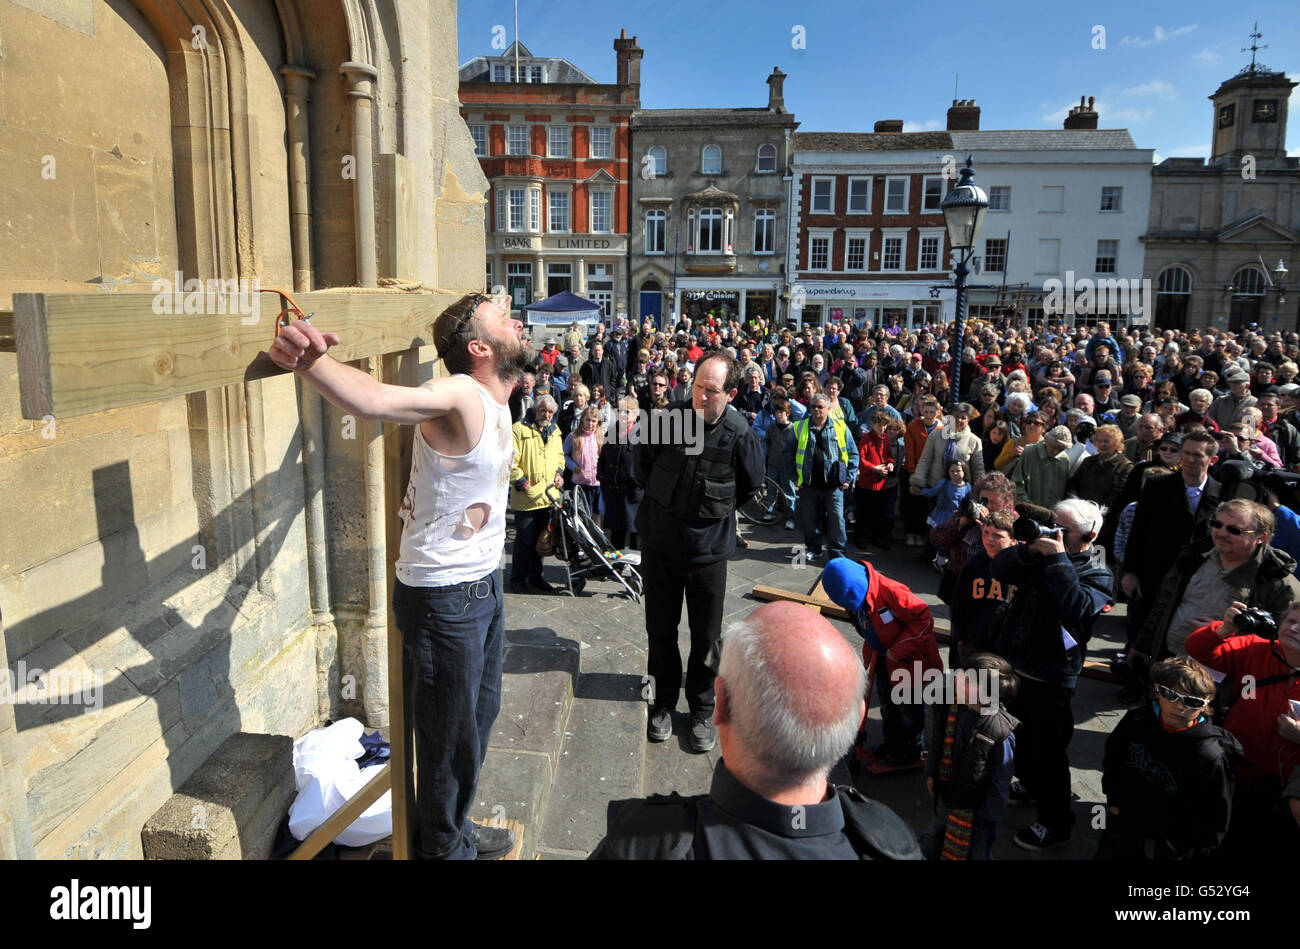 The final scene of the Devizes Passion play organized by the Devizes Church Community in Devises, Wiltshire. Stock Photo